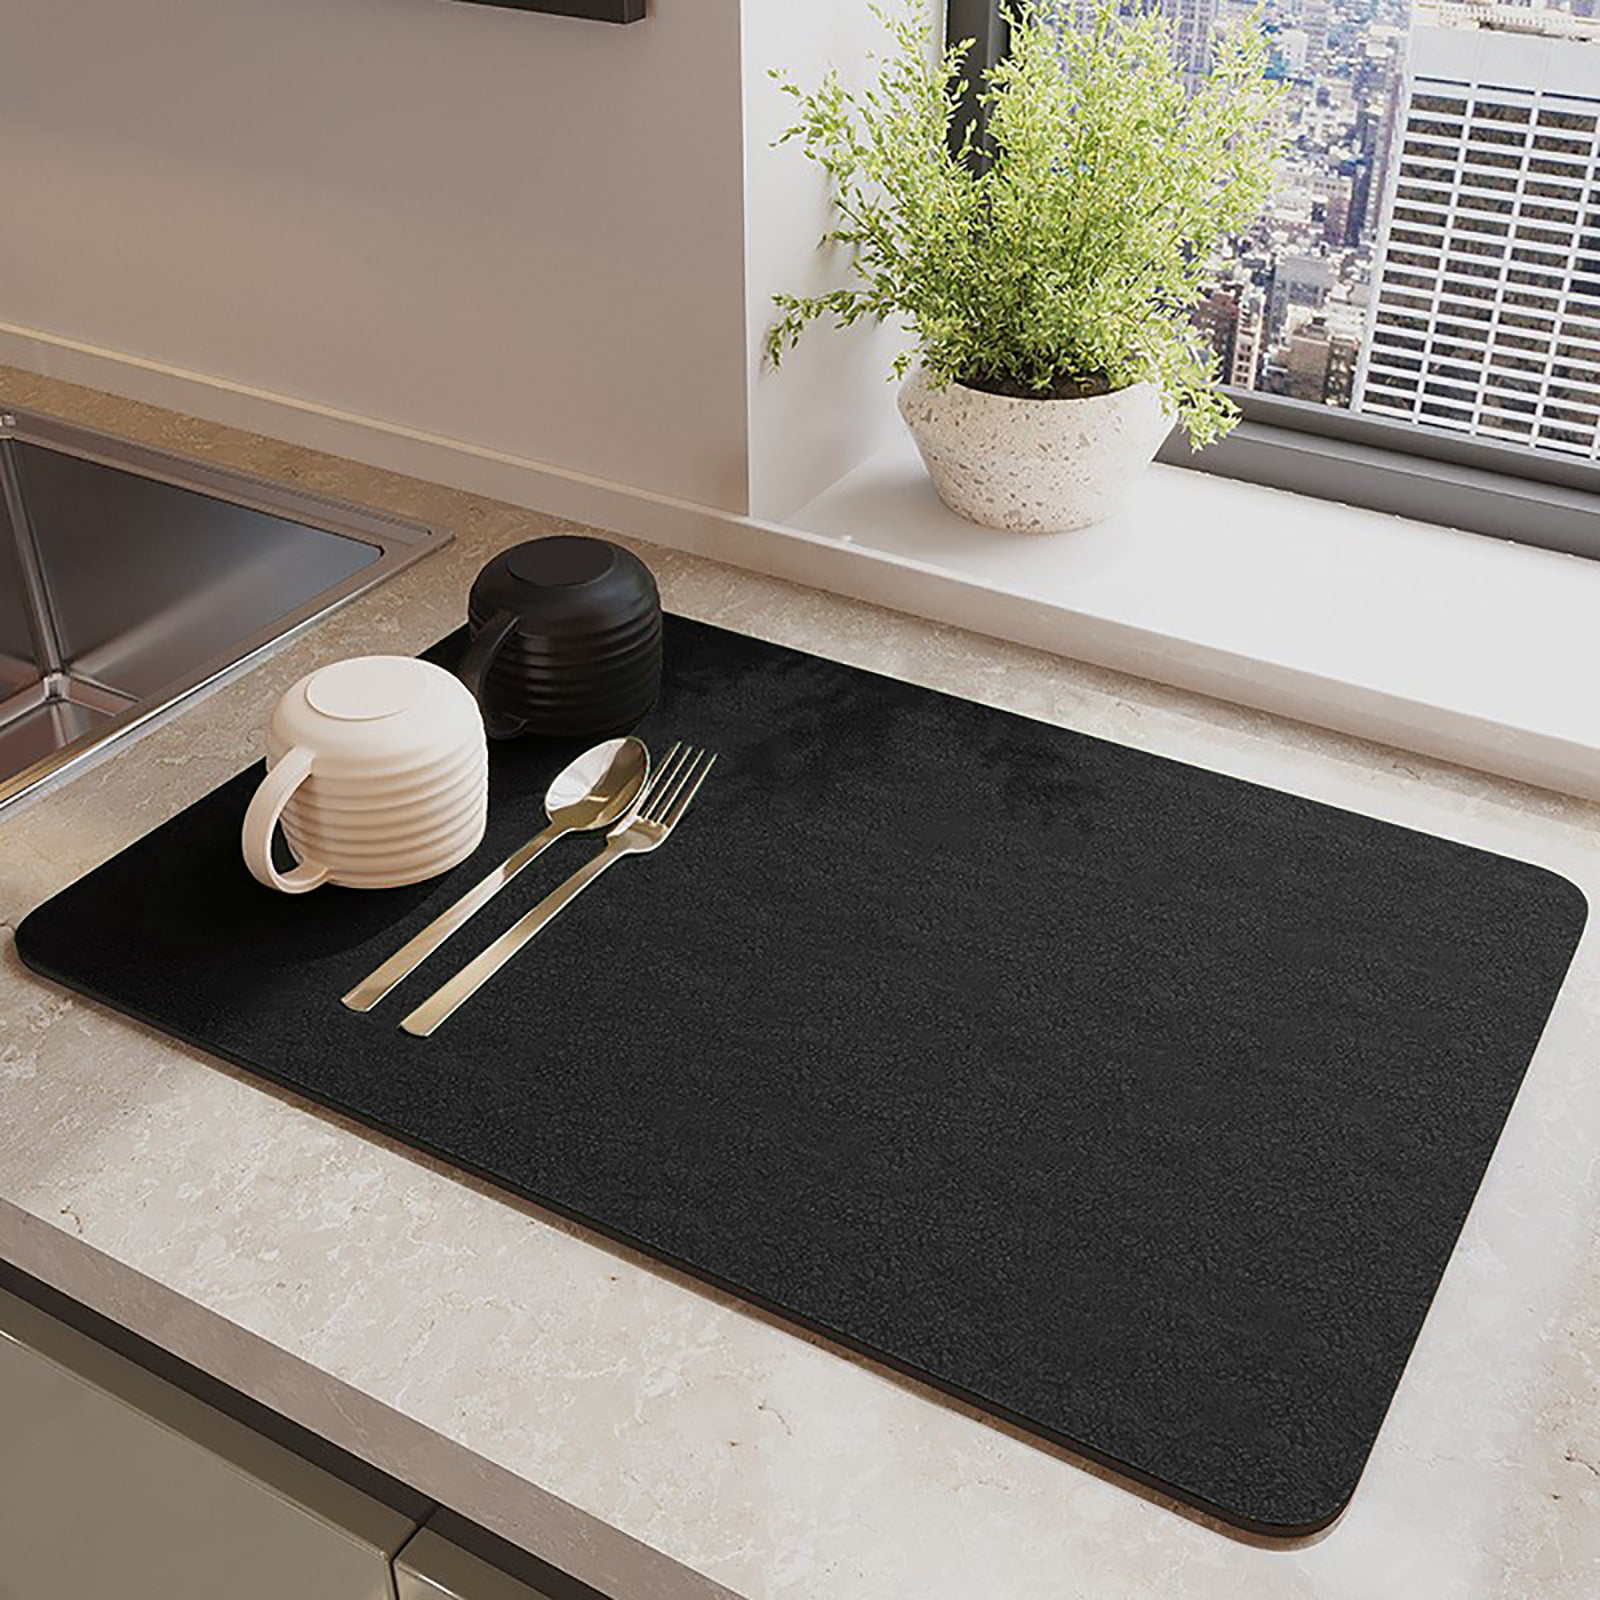 Rnivvi Coffee Mat, 16x24 Coffee Bar Mat for Coffee Station Accessories  and Organizer, Hide Stain Anti Absorbent Dish Drying Pad for Kitchen  Counter